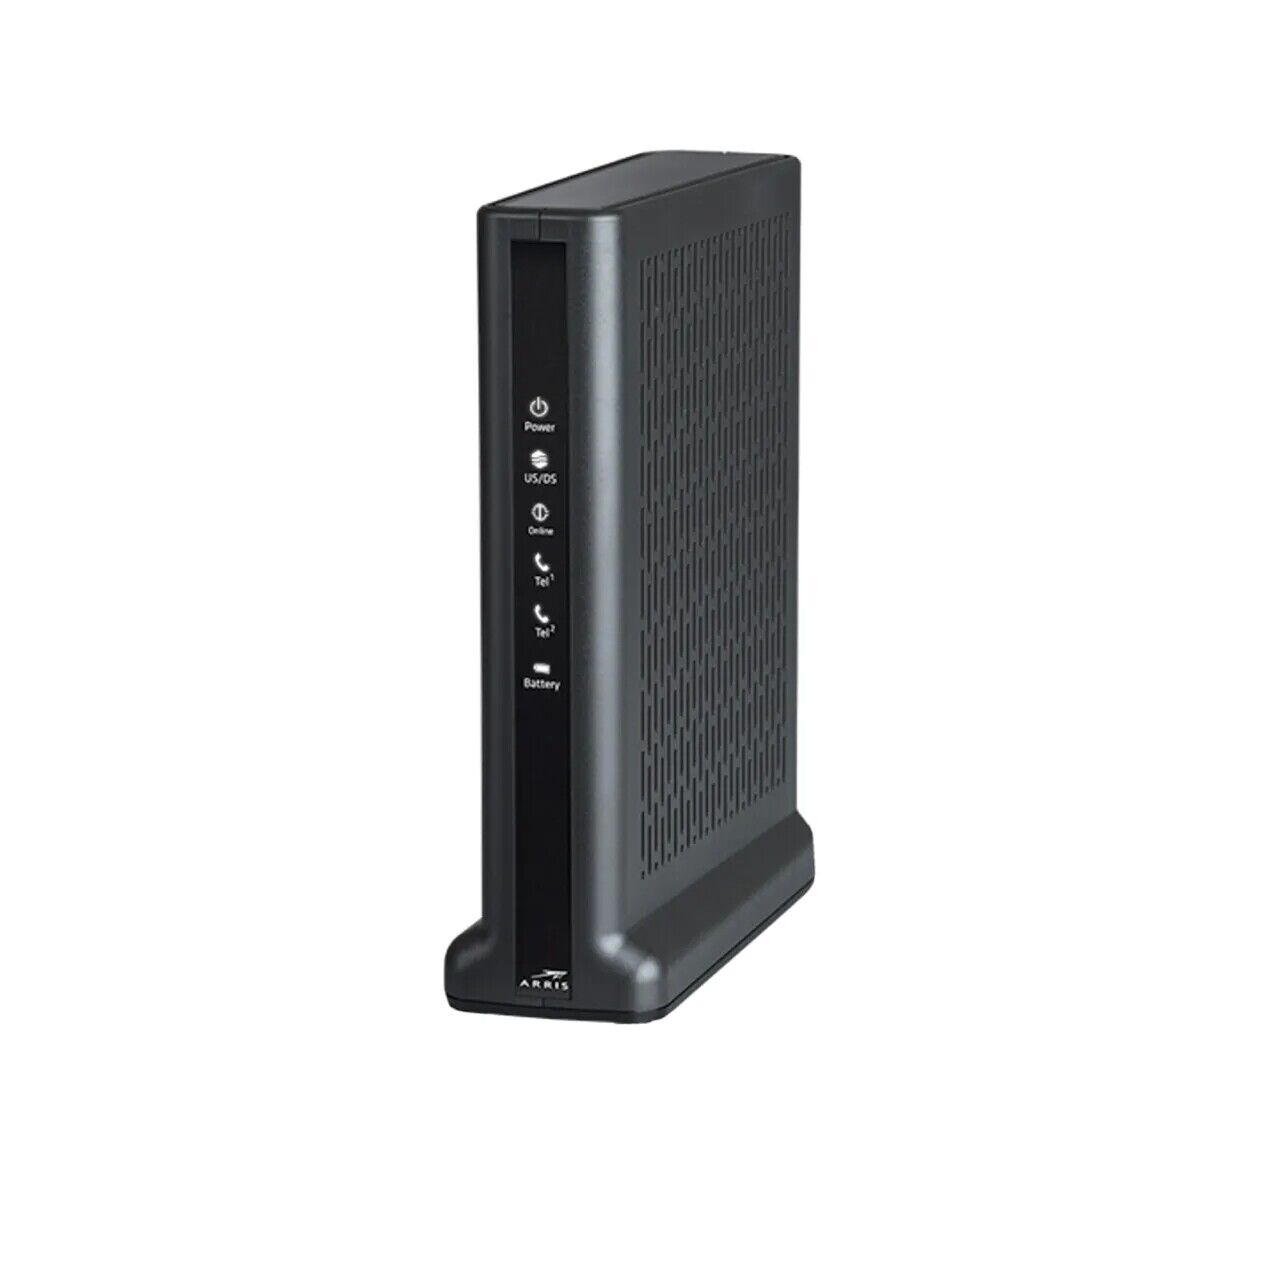 OPTIMUM ARRIS TM3402A (TM3402) PHONE MODEM W/ BACKUP BATTERY FOR POWER OUTAGES